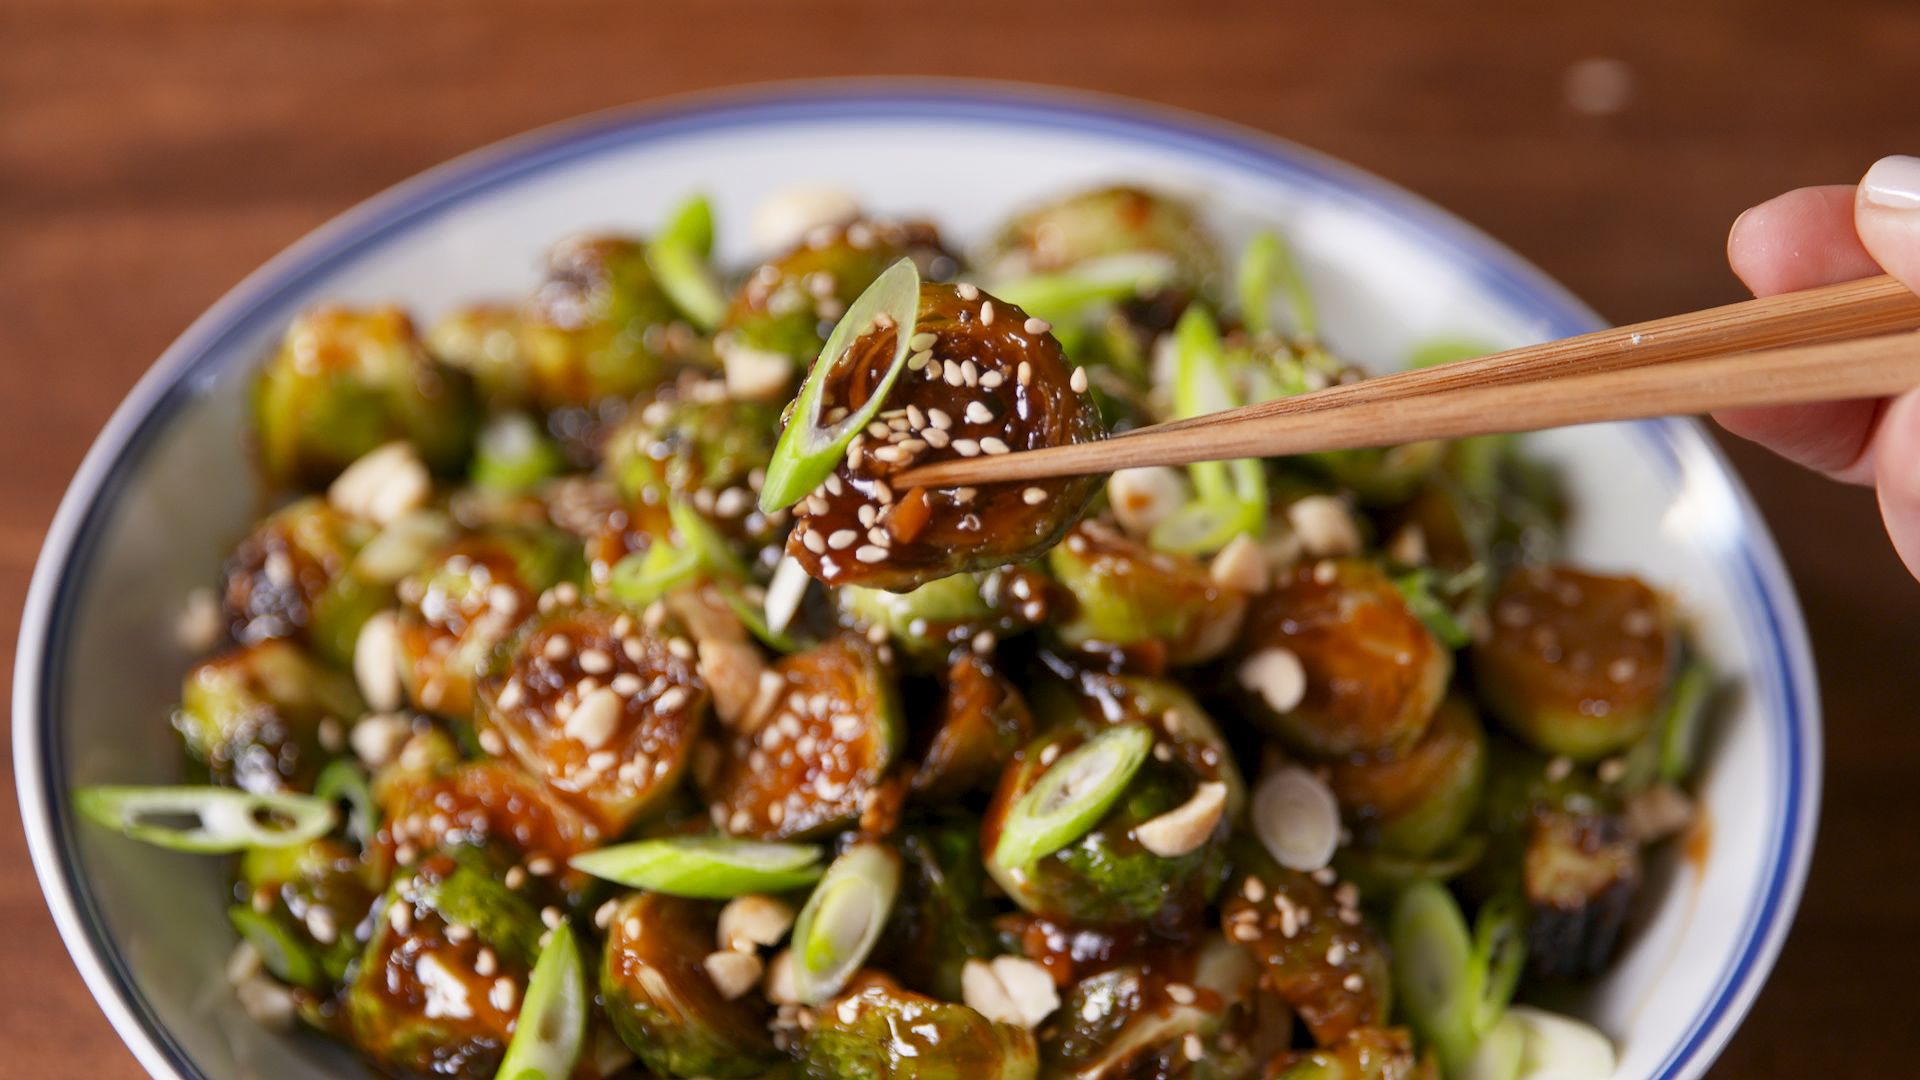 Healthy & Delicious Kung Pao Brussels Sprouts